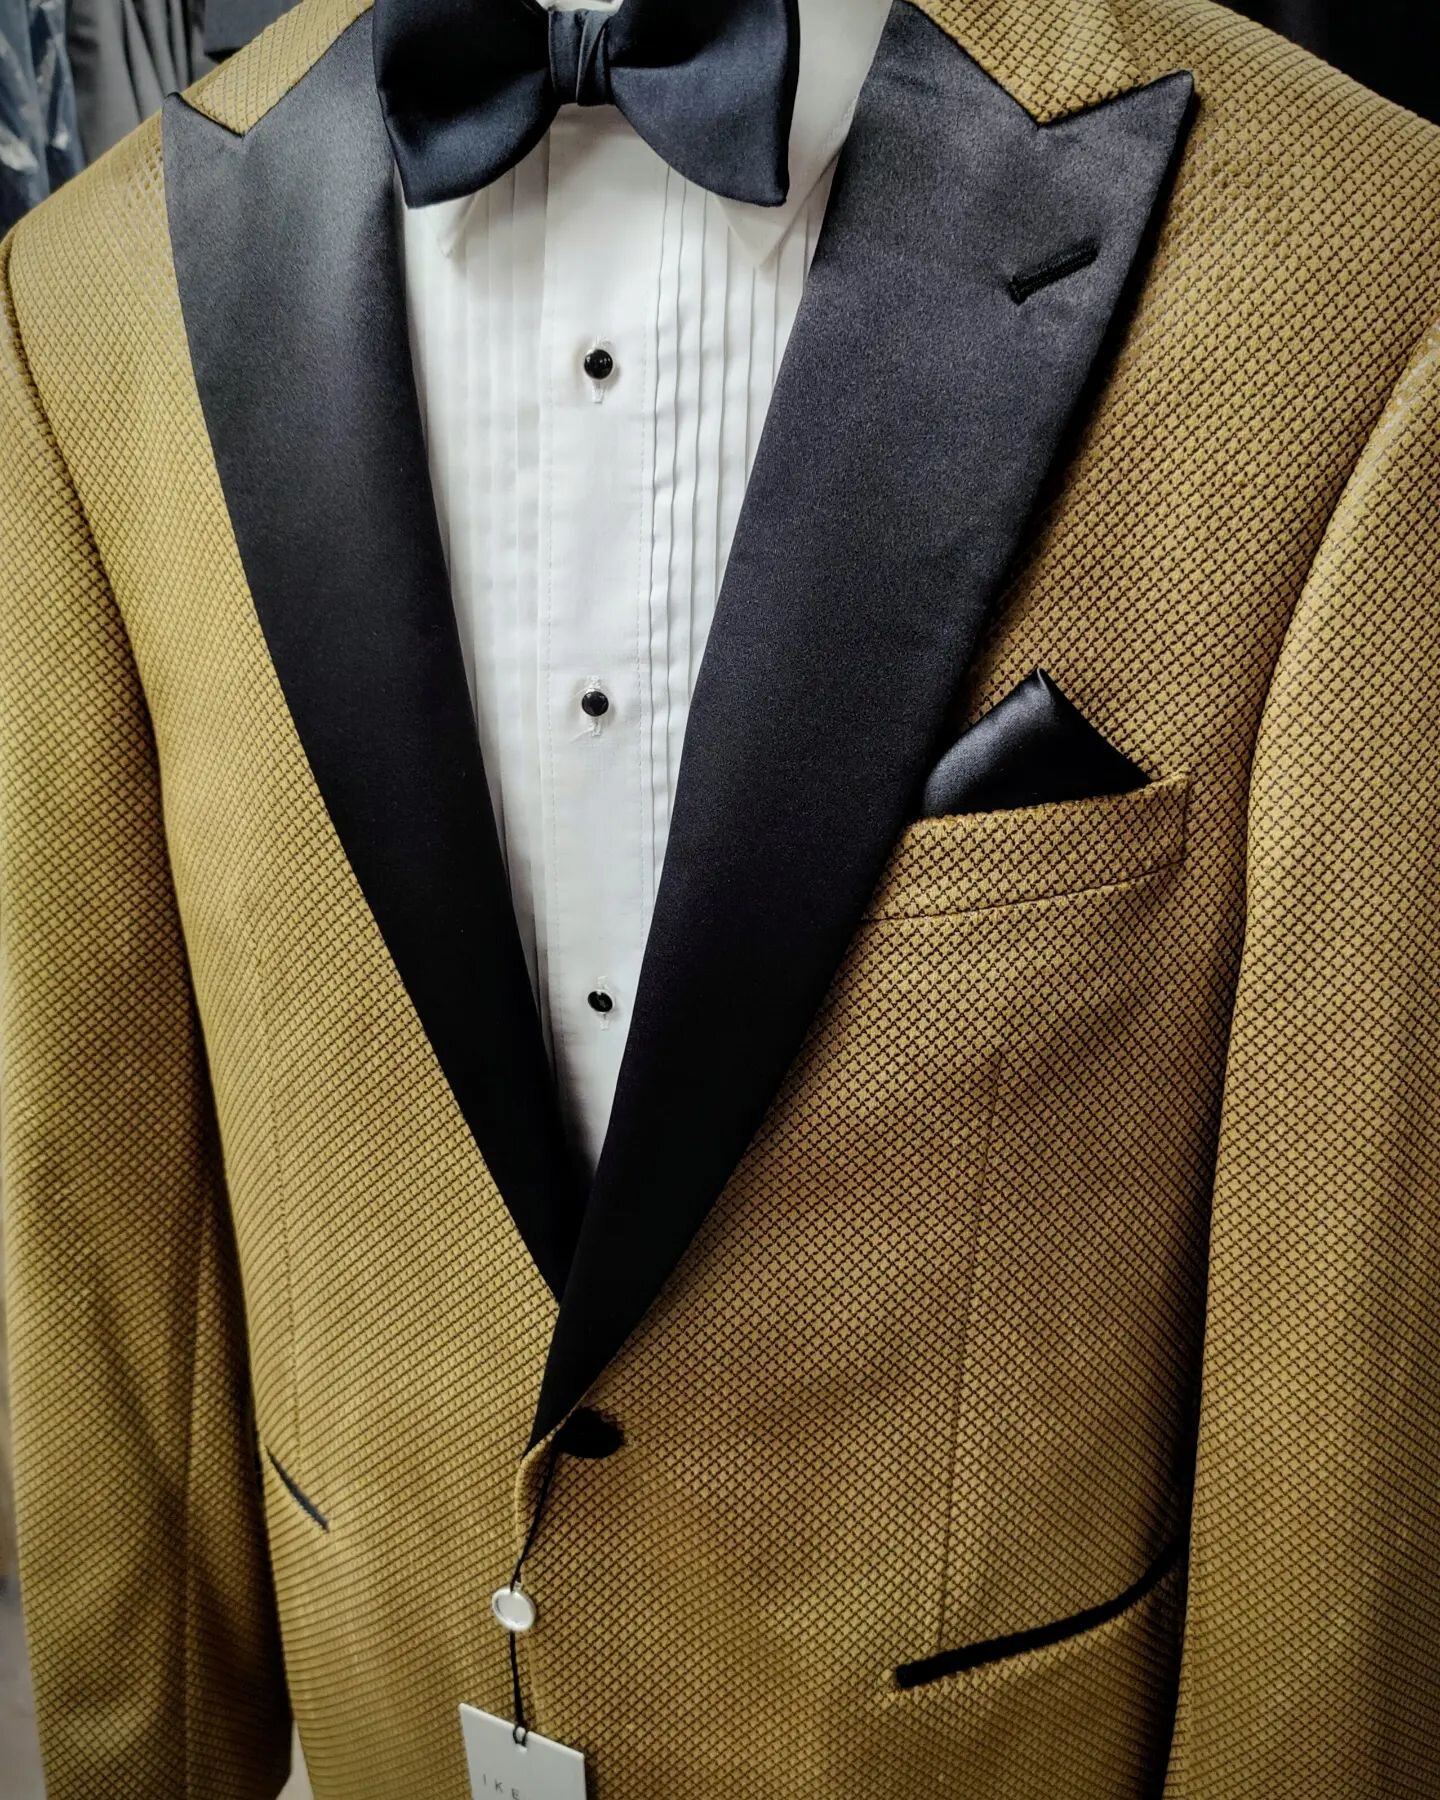 Our brand new Ike Behar gold velvet dinner jacket, trimmed in black. 

It's perfect for a New Years Eve party! 

#shopsmallbusiness 
#shoplocal 
#menswear